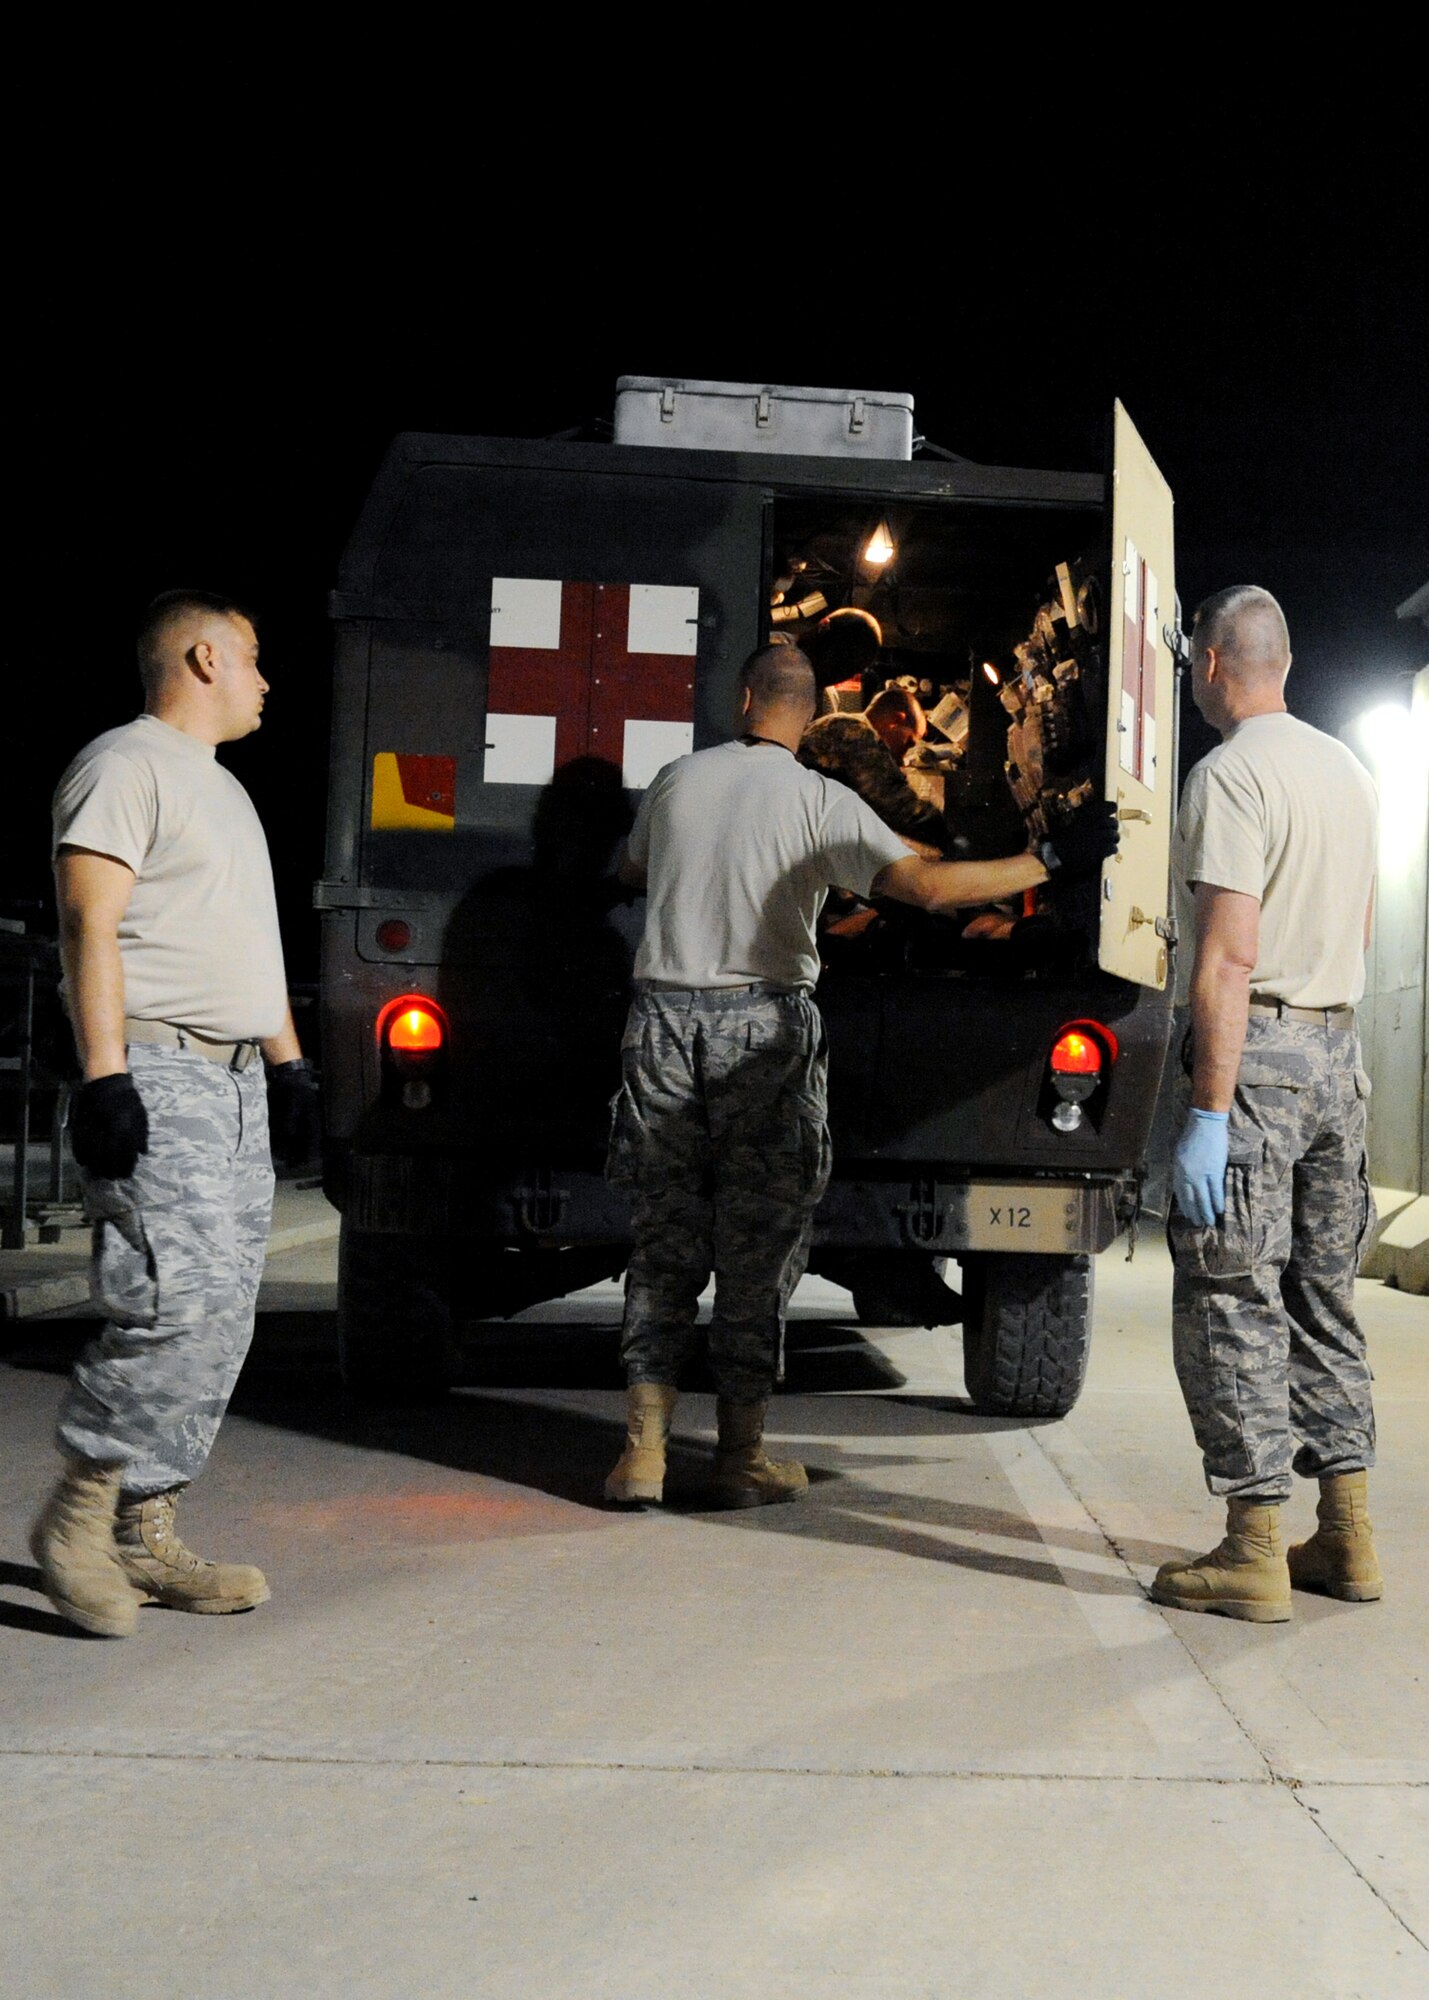 JOINT BASE BALAD, Iraq -- Volunteers prepare to help patients off of an ambulance to direct them to the emergency room at the Air Force Theater Hospital Nov. 2, 2009. Volunteers also help gather patients' belongings and supplement personnel resources in case of a mass-casualty event. (U.S. Air Force photo/Senior Airman Christopher Hubenthal)